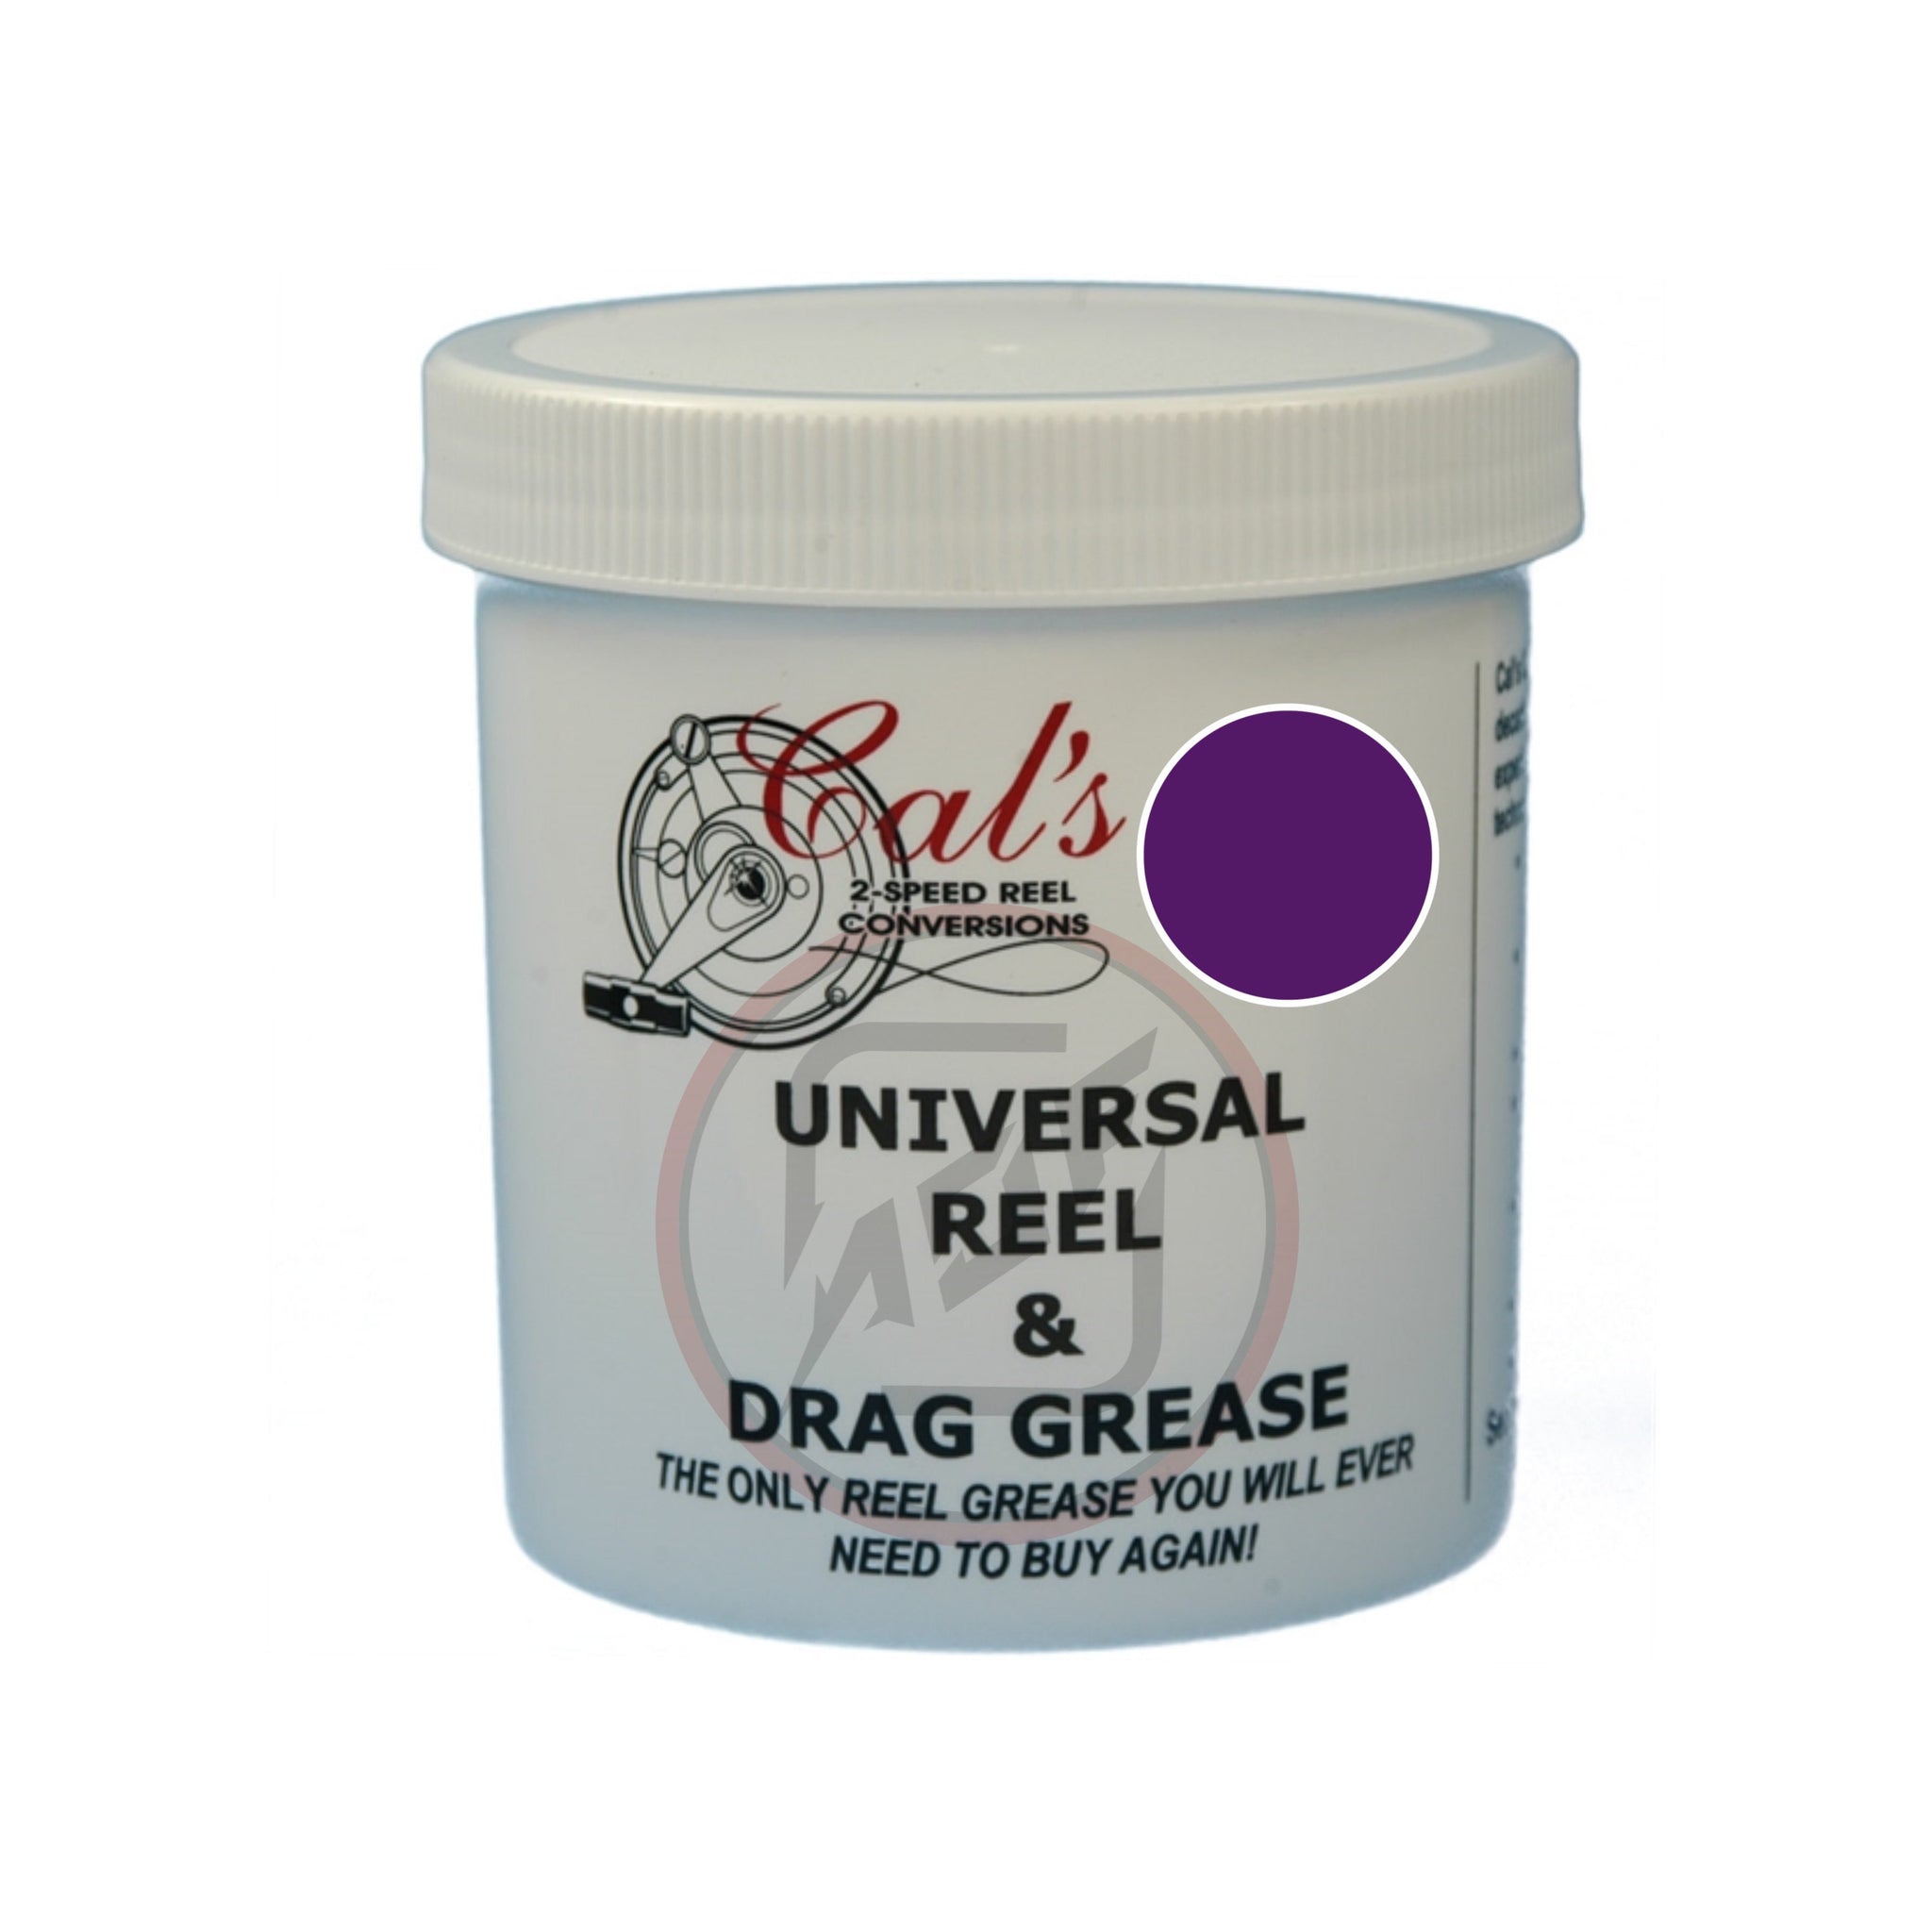 Cal's Universal Reel and Drag Grease 1 oz.